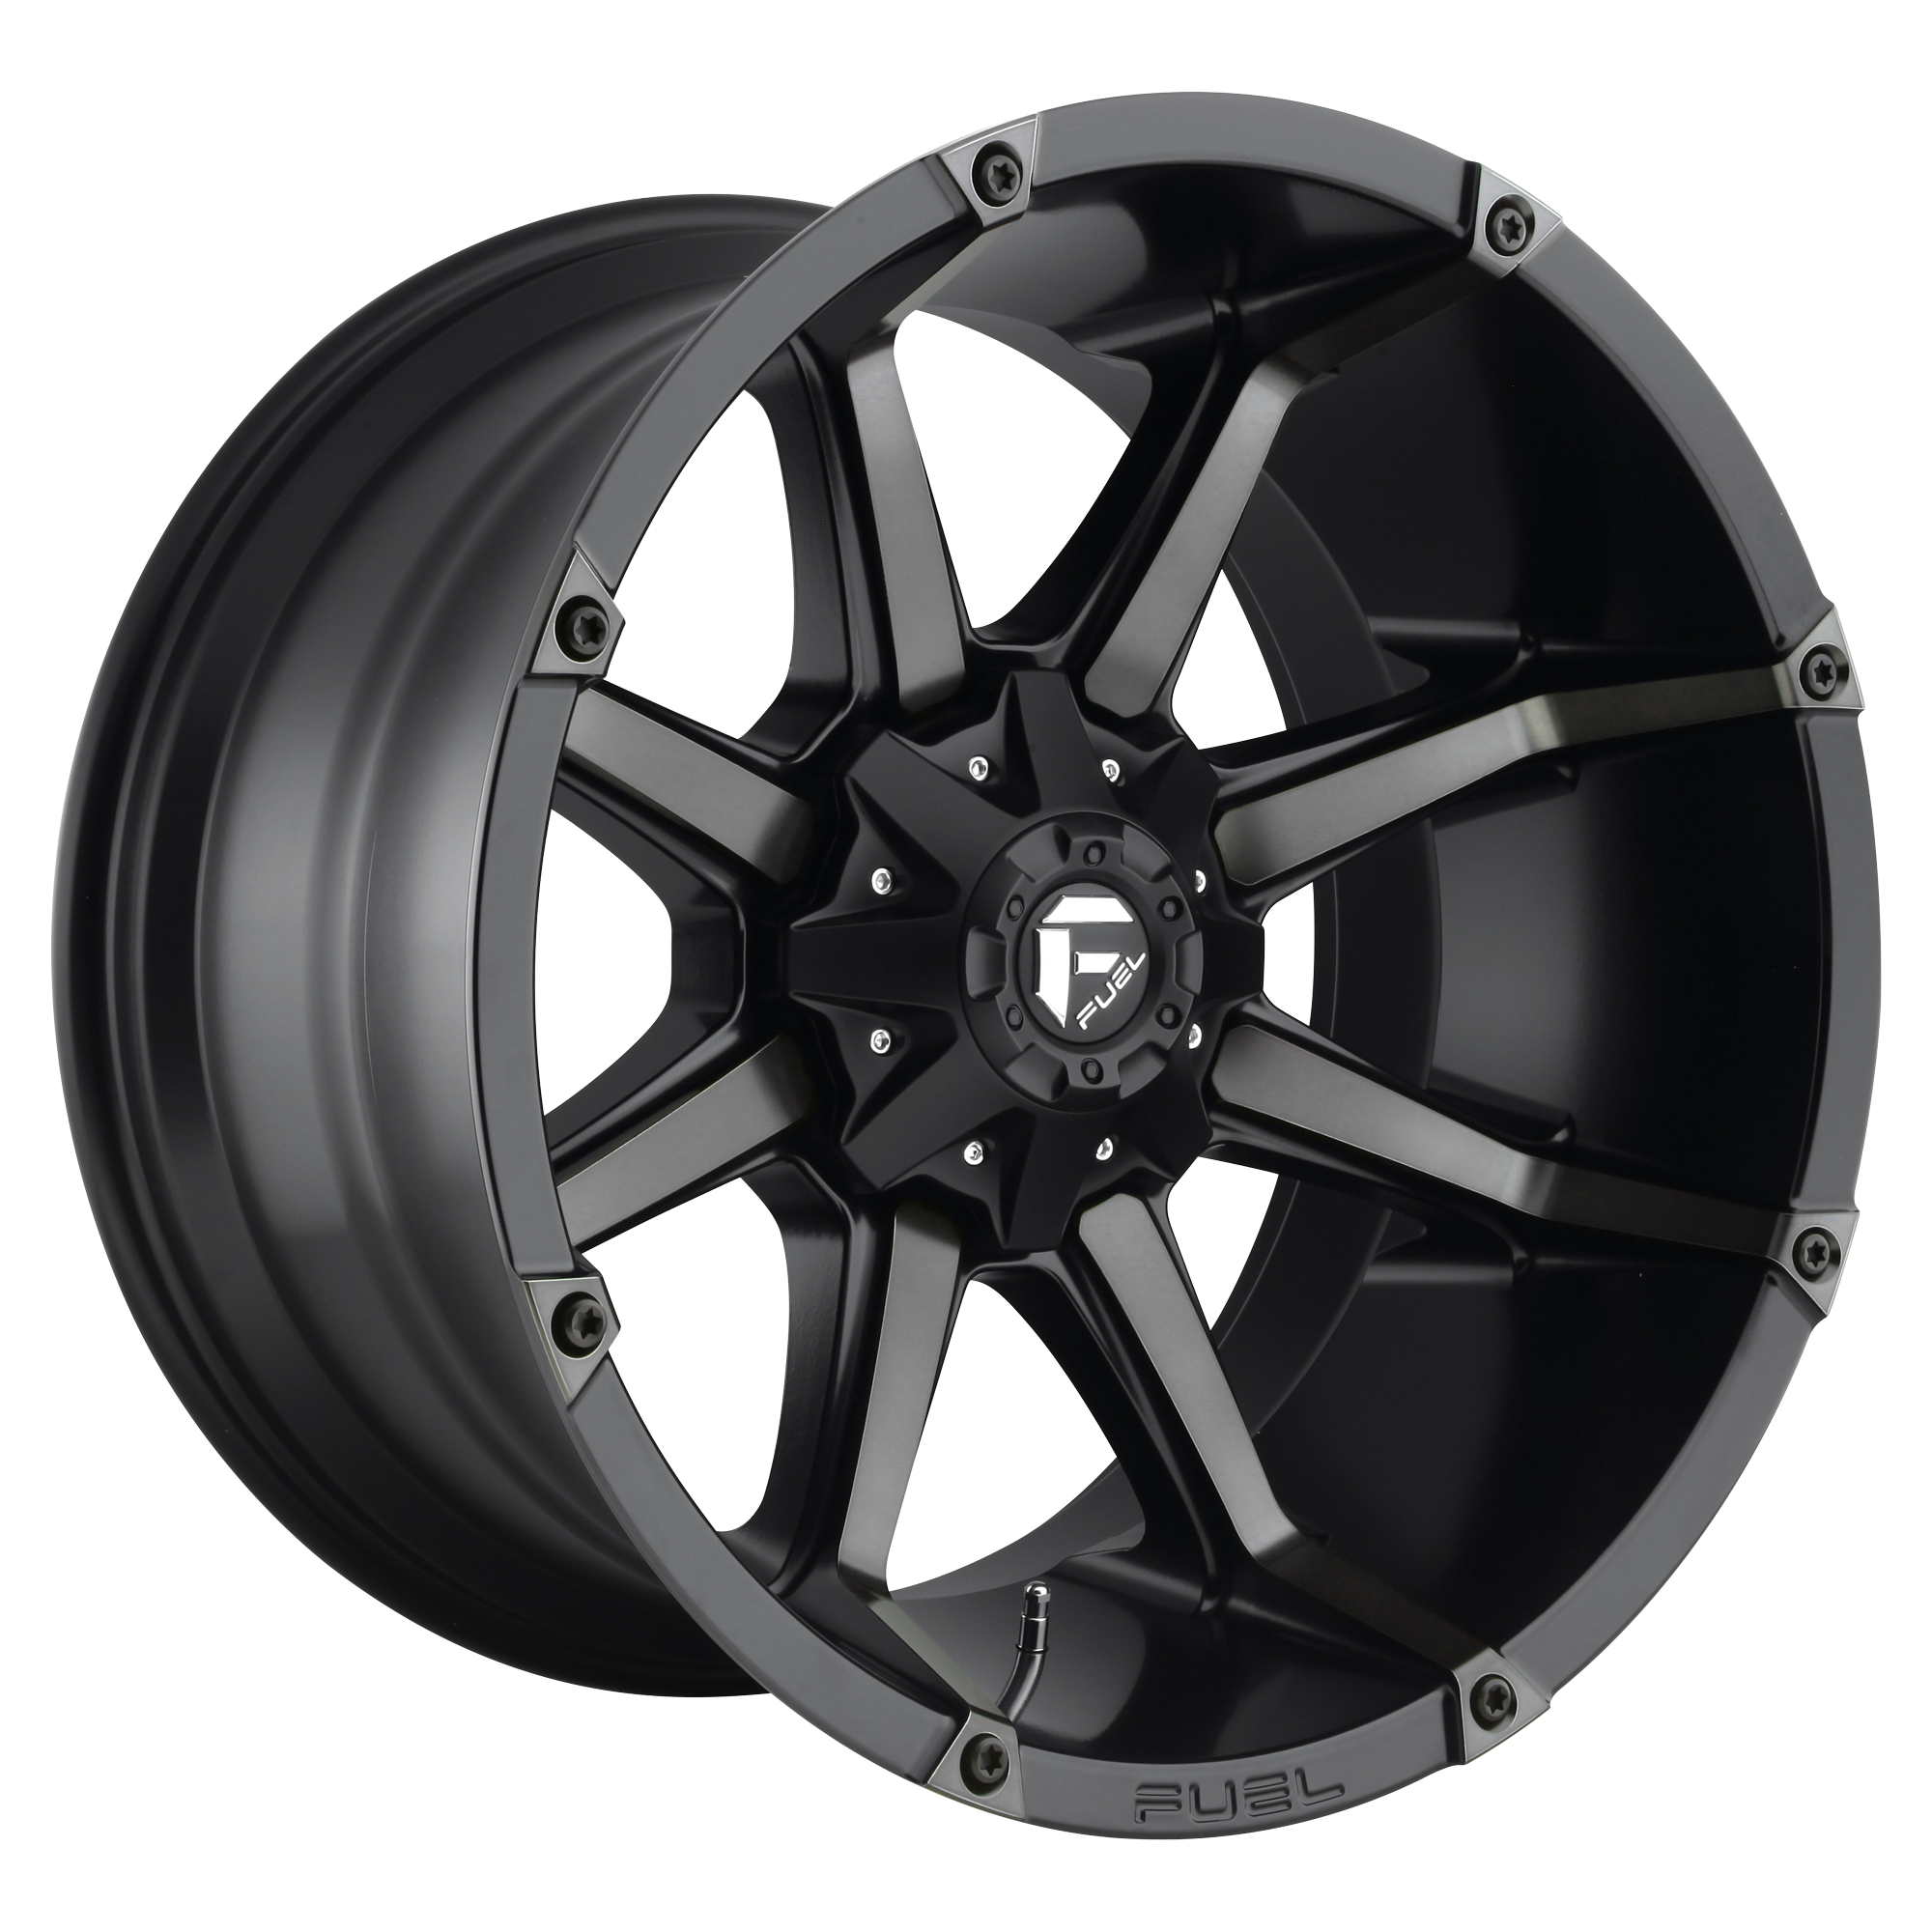 COUPLER 20x9 5x114.30/5x127.00 MATTE BLACK DOUBLE DARK TINT (1 mm) - Tires and Engine Performance